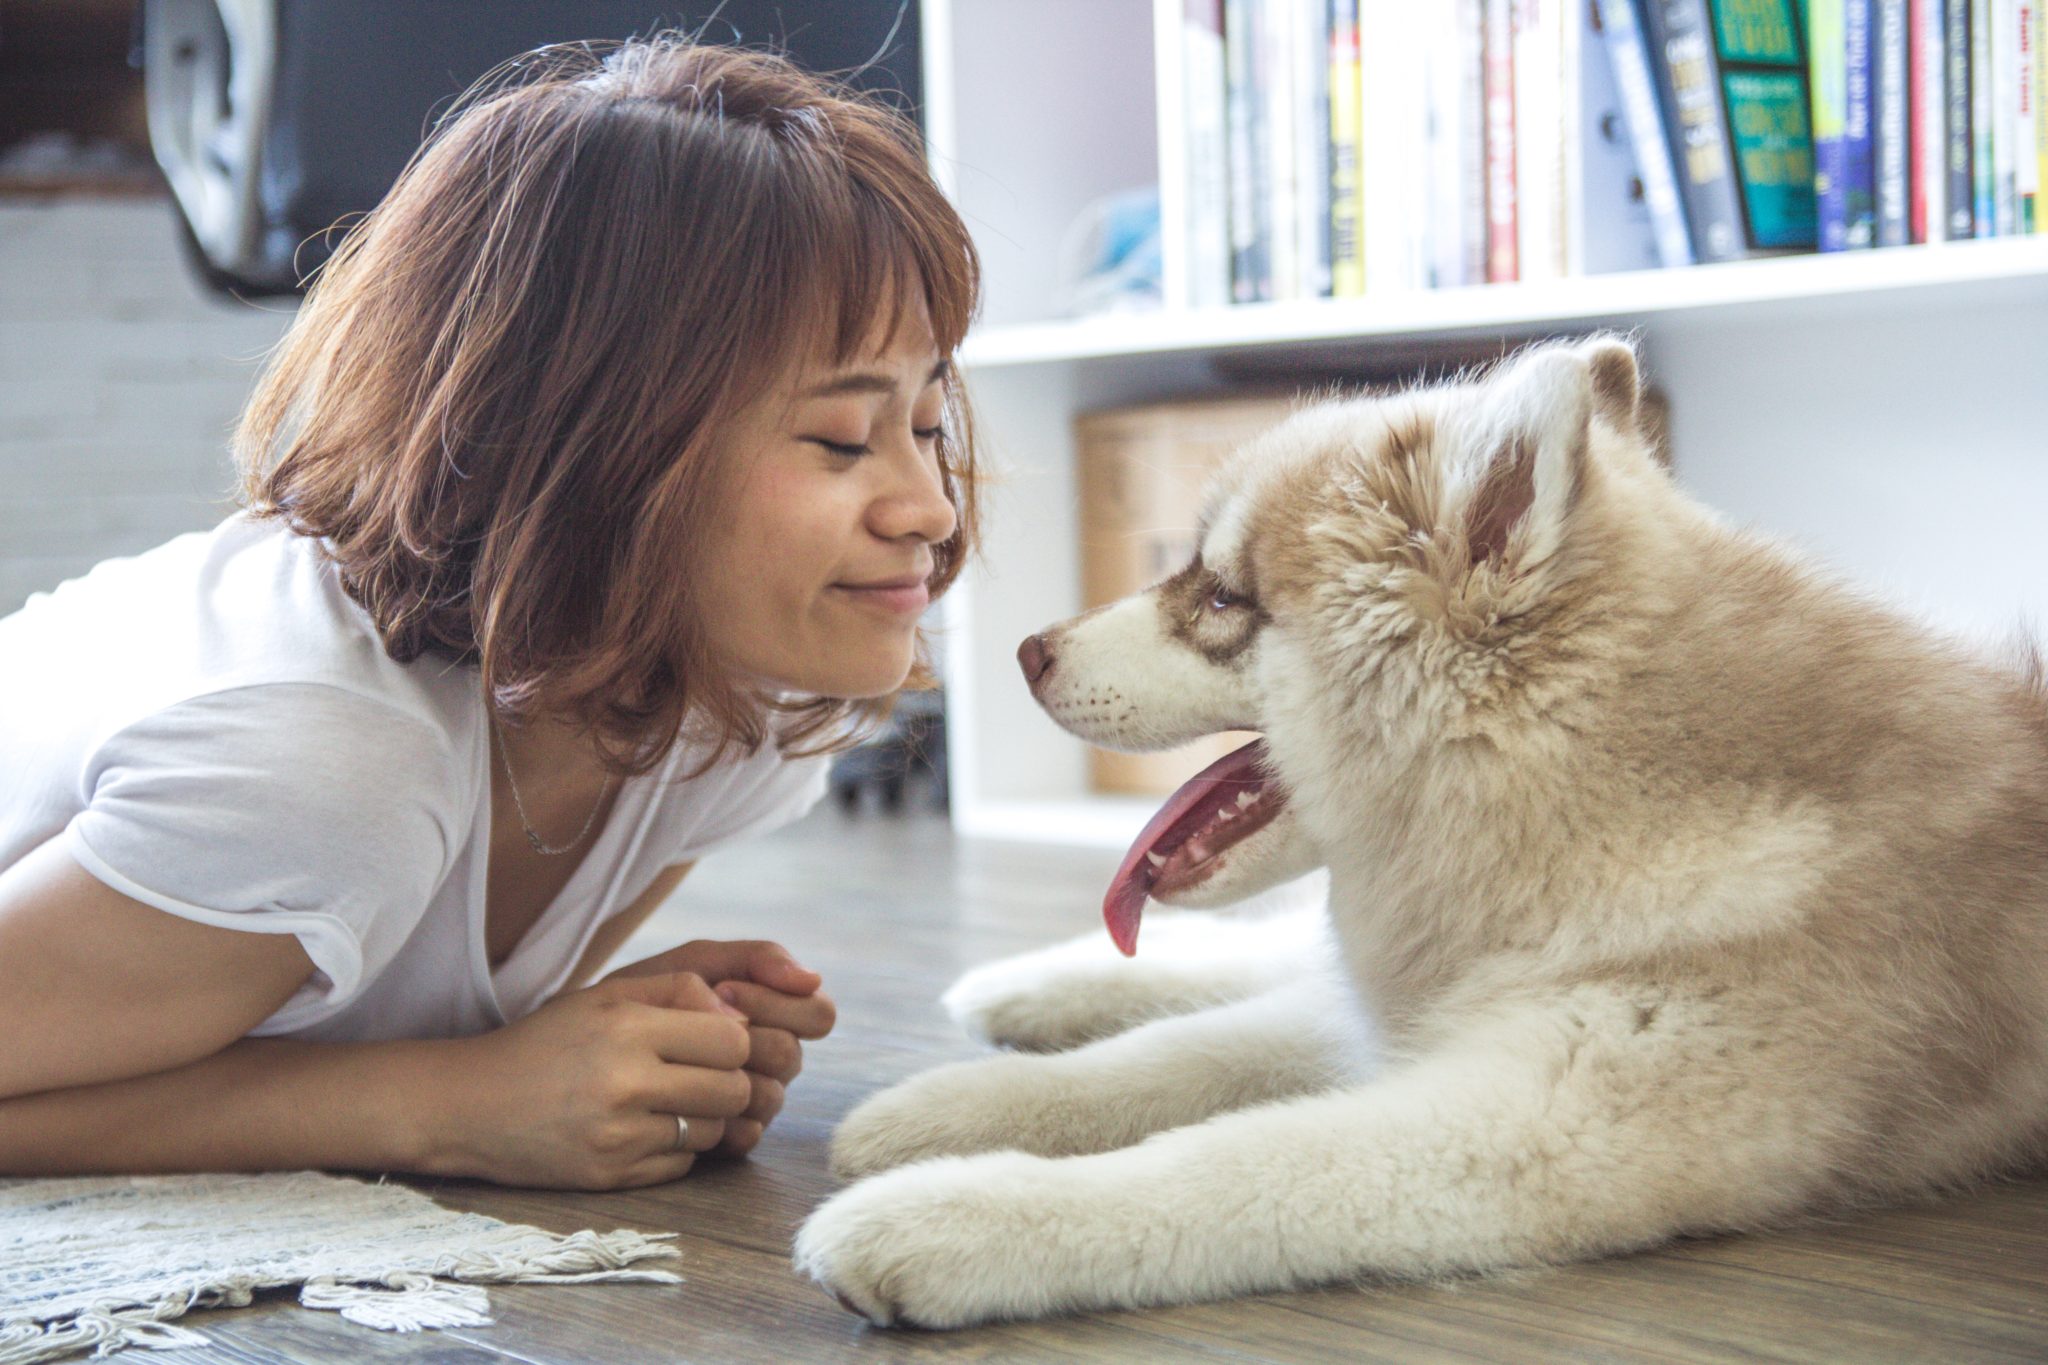 How to Deal With Asthma When Living With Pets